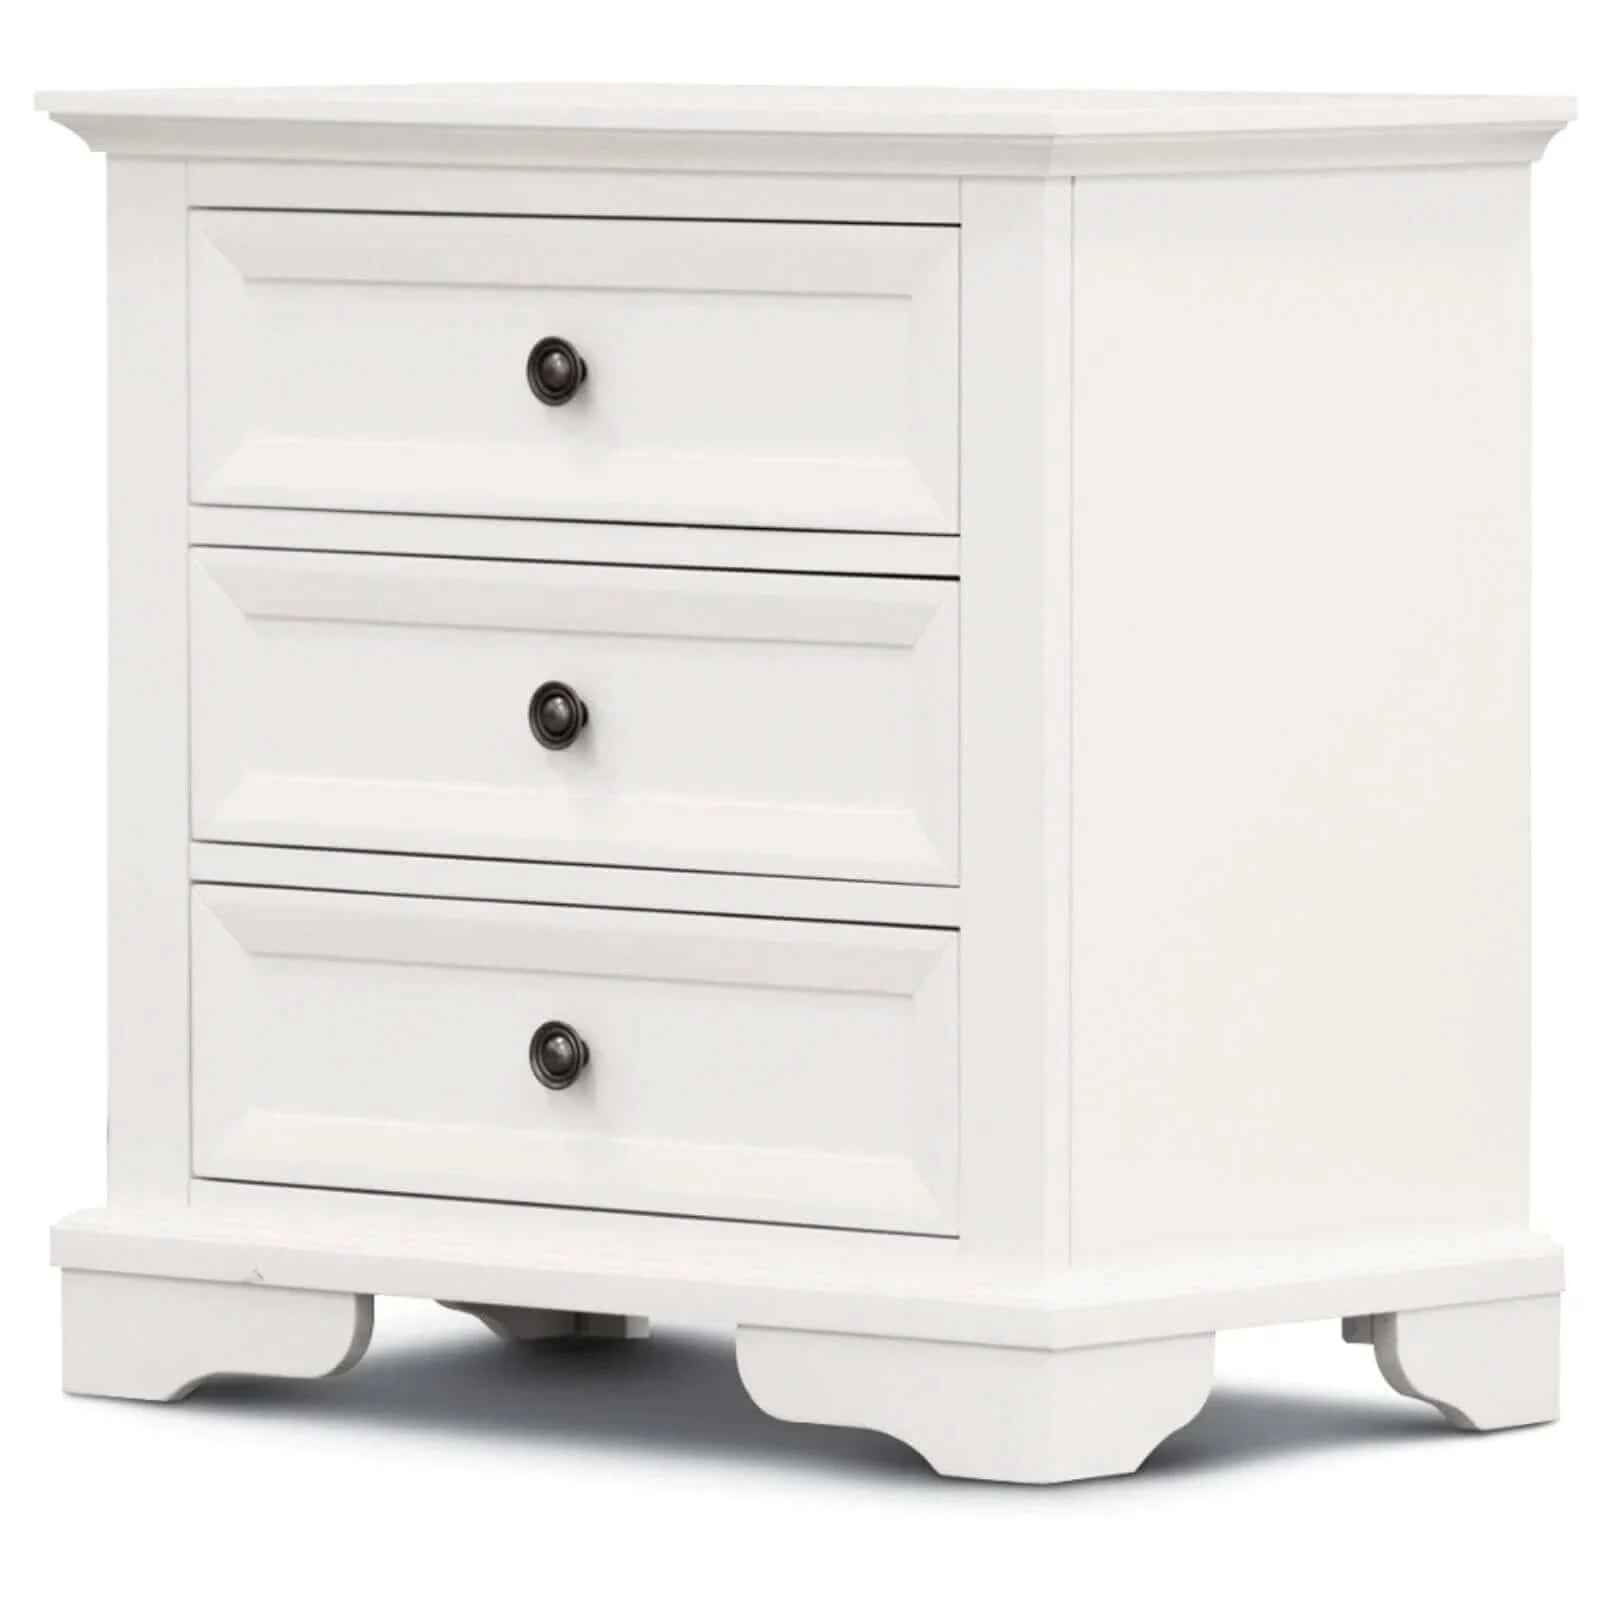 Buy celosia bedside table 3 drawers storage cabinet nightstand end tables - white - upinteriors-Upinteriors